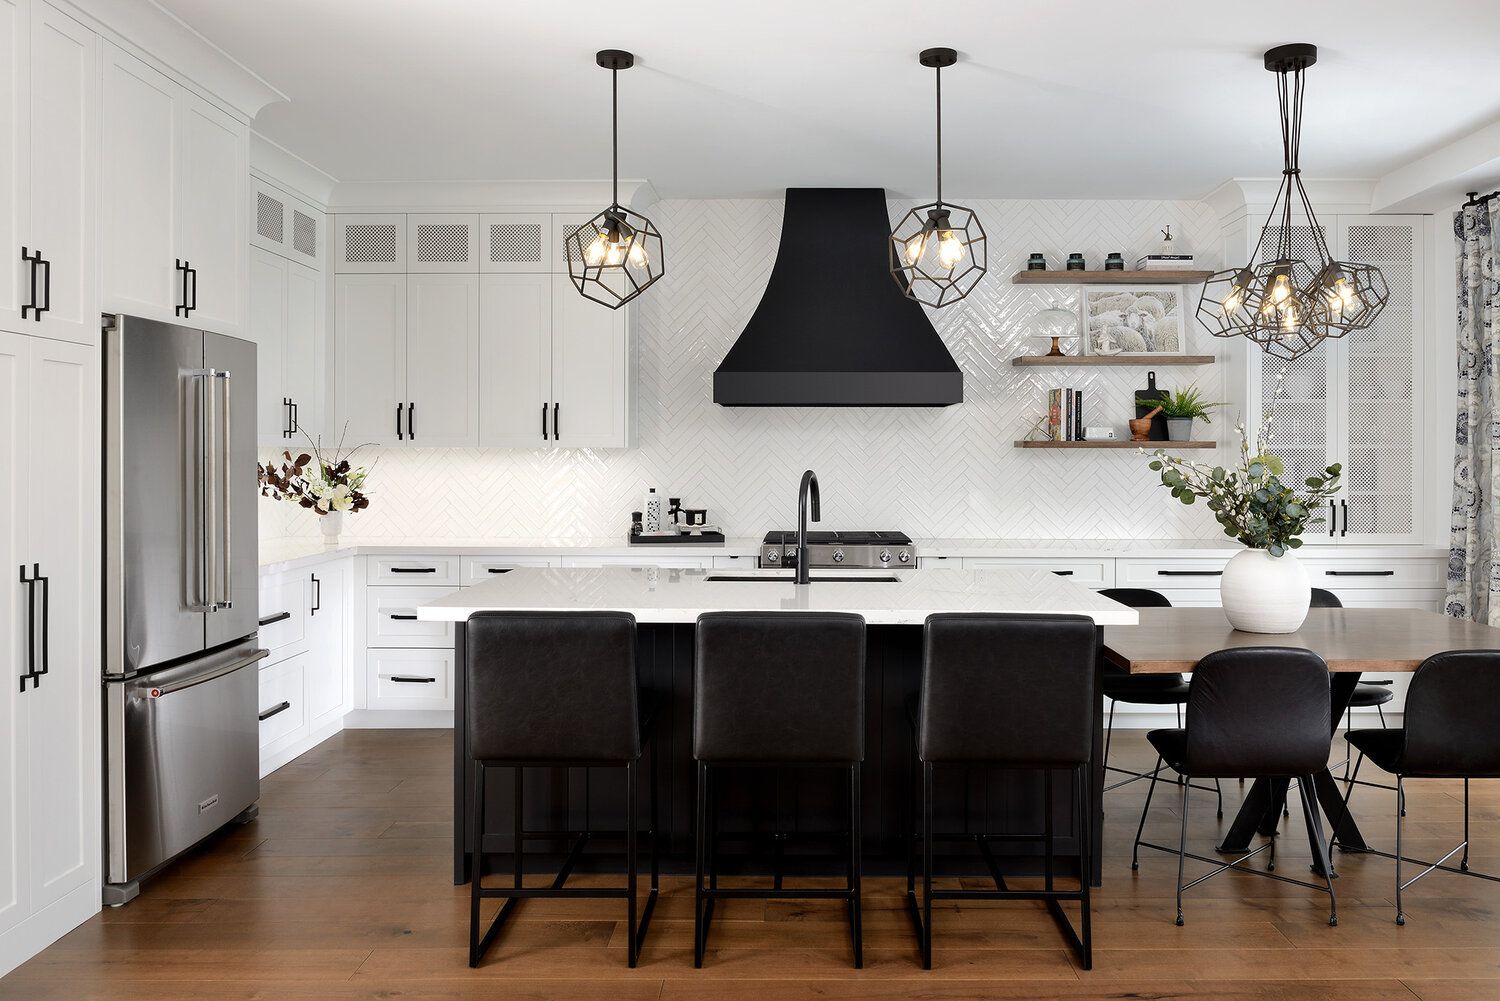 What Is The Best Lighting For A Kitchen?